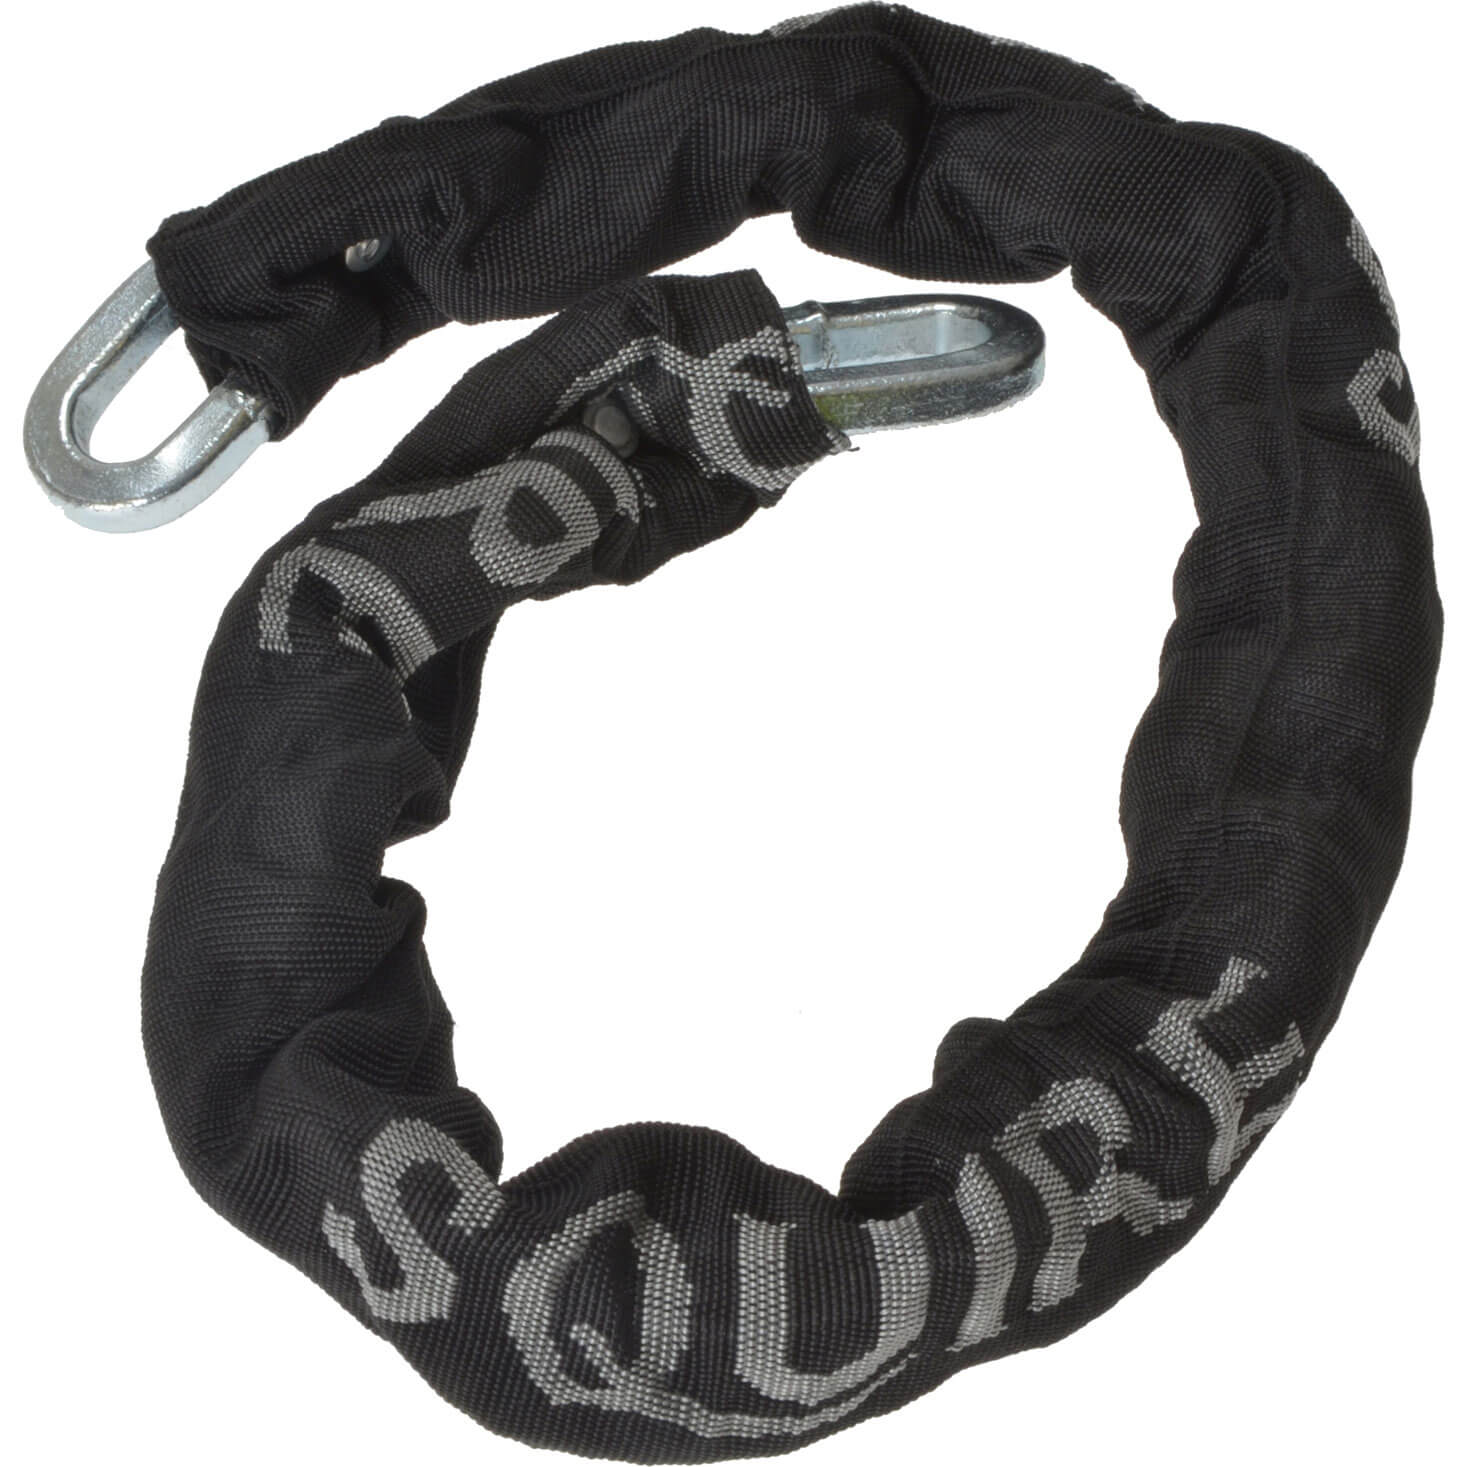 Photos - Bike Lock Squire Henry  J3 Round Section Hard Chain 10mm 900mm G3 